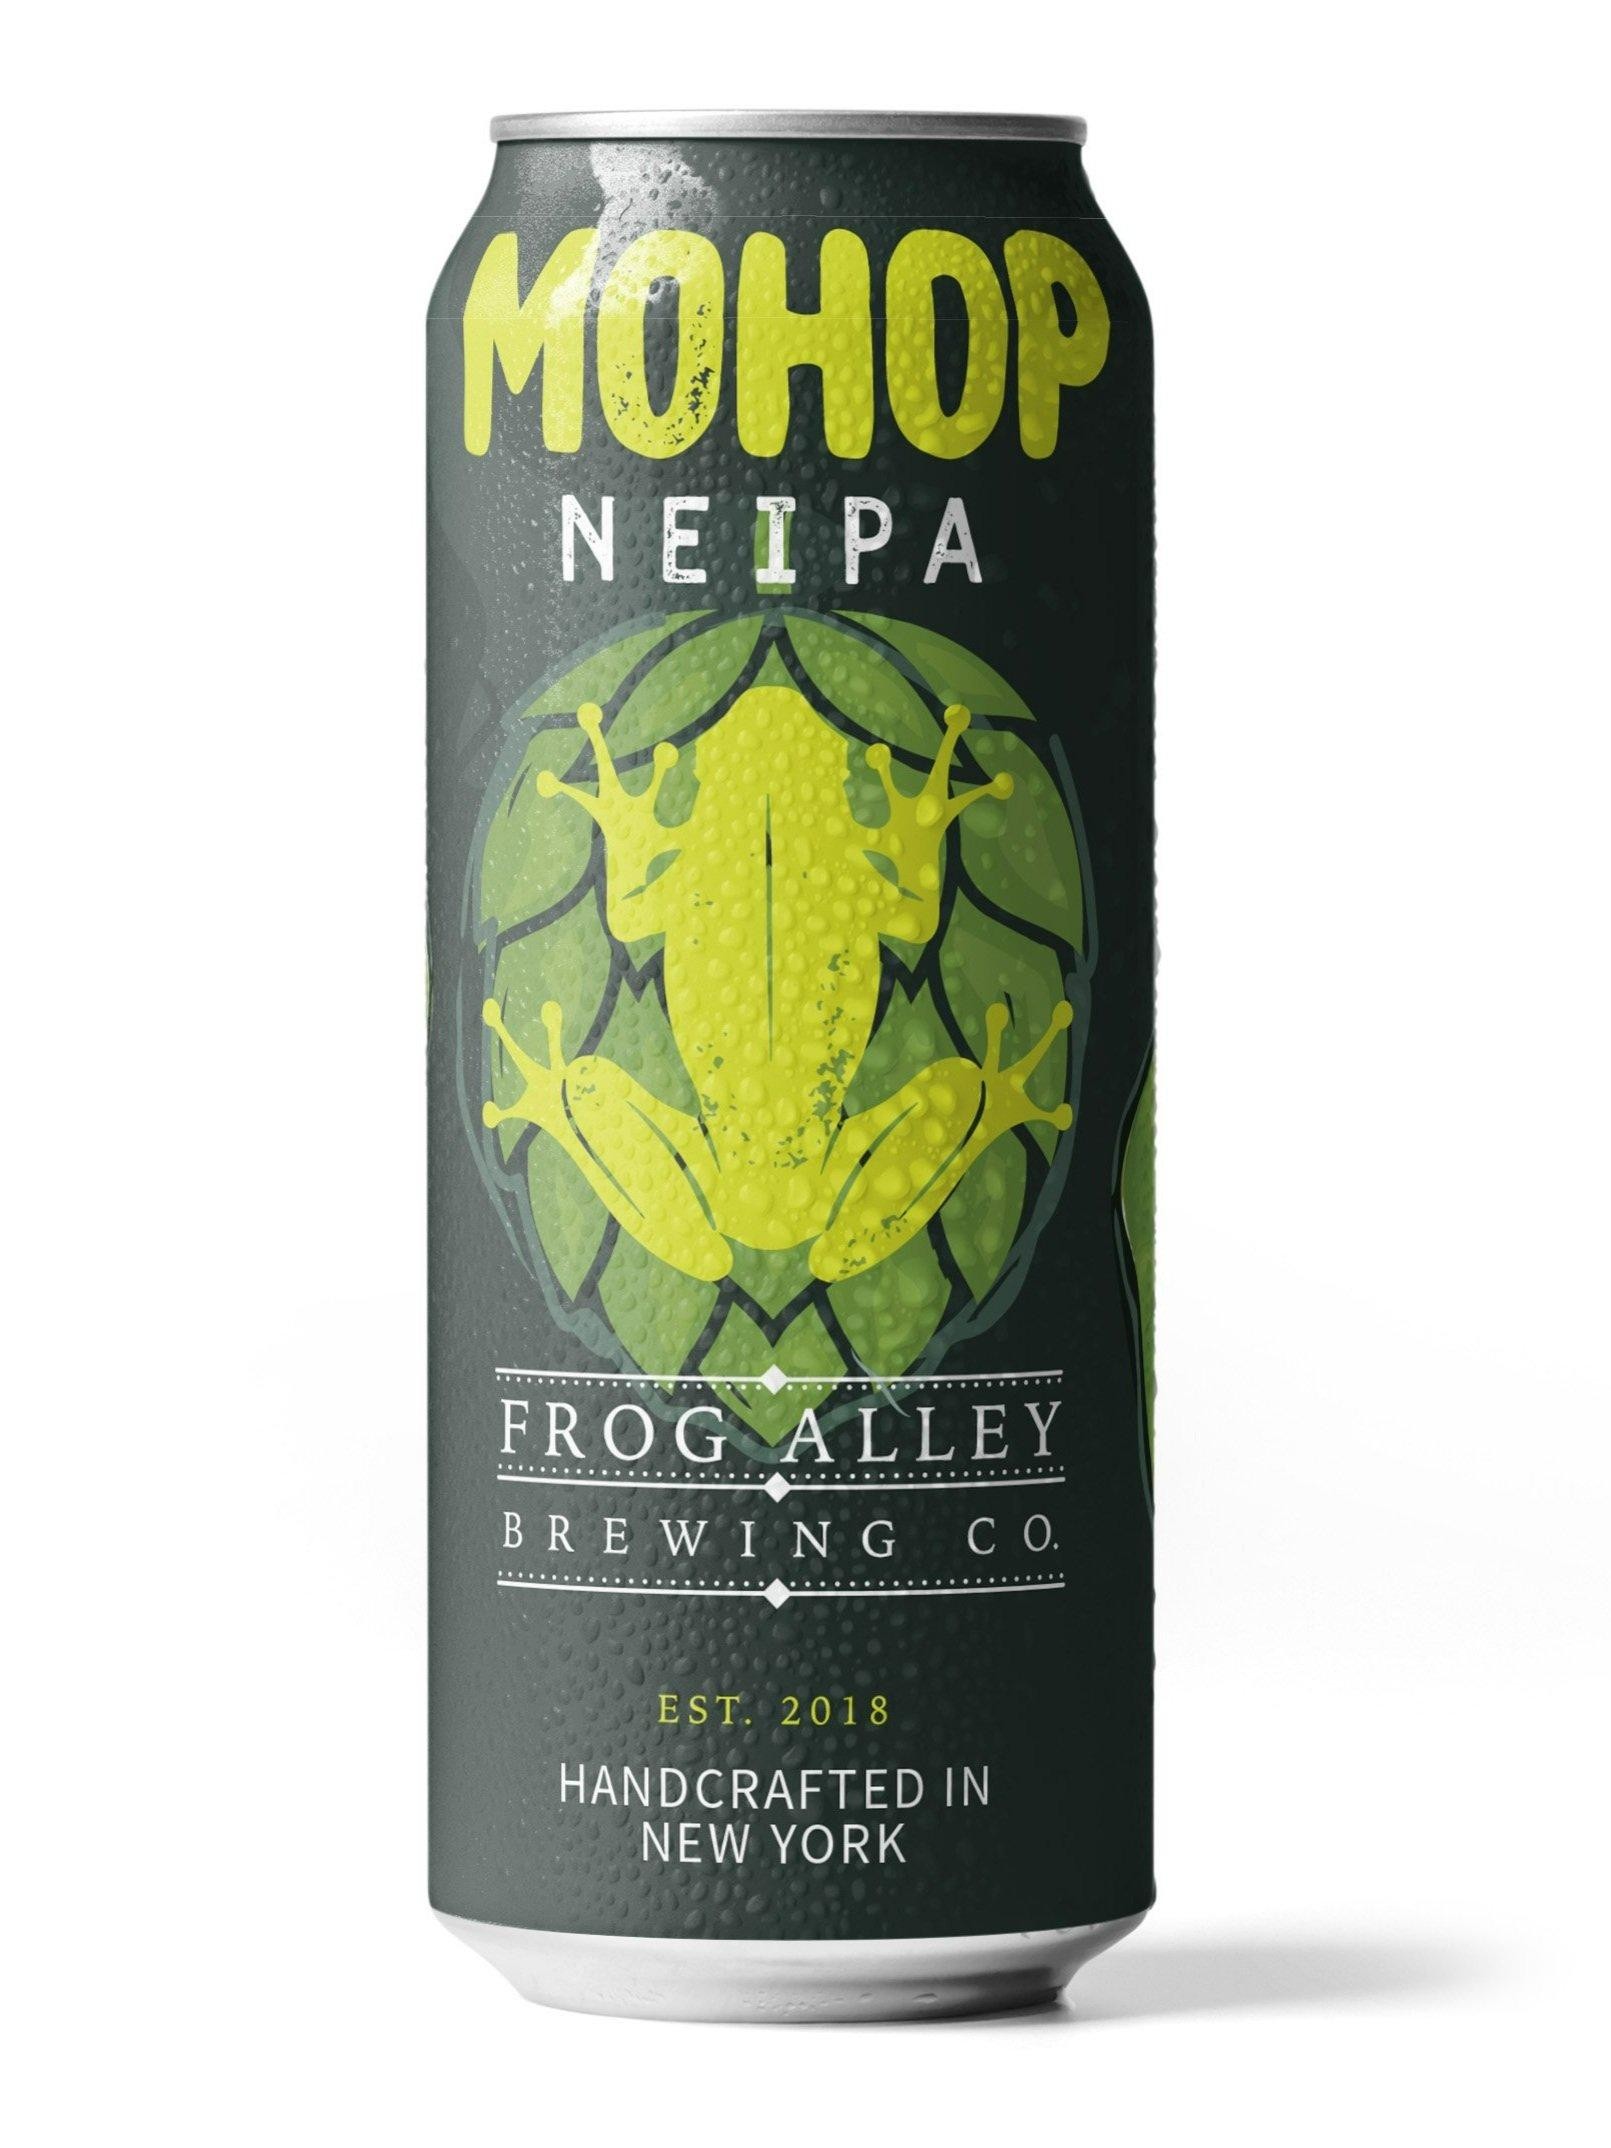 Frog Alley "MoHop" NEIPA 16oz